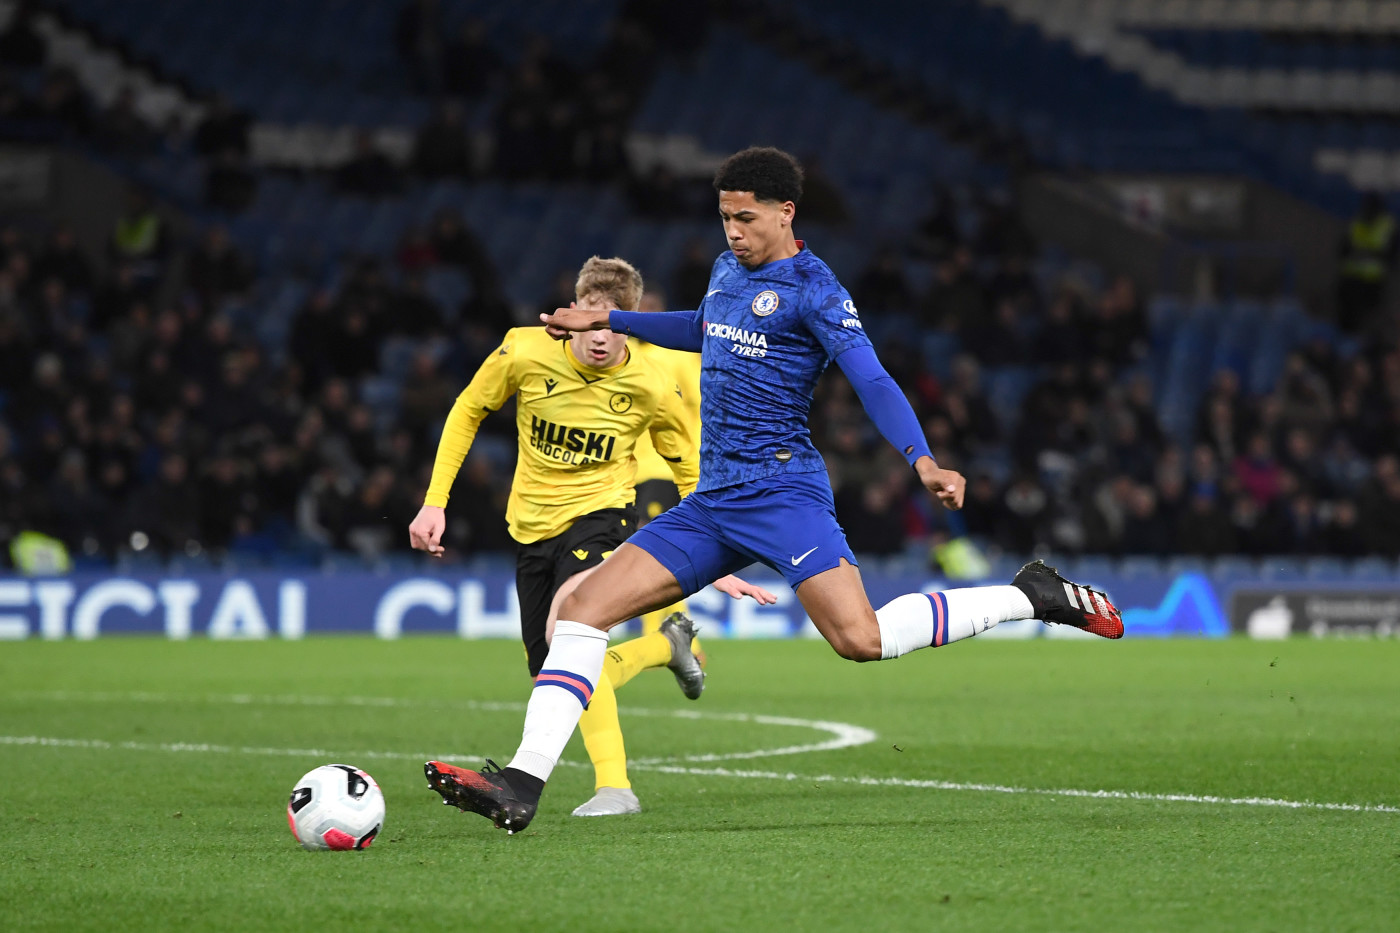 Levi playing for Chelsea Under-18s v Millwall in the FA Youth Cup back in 2020